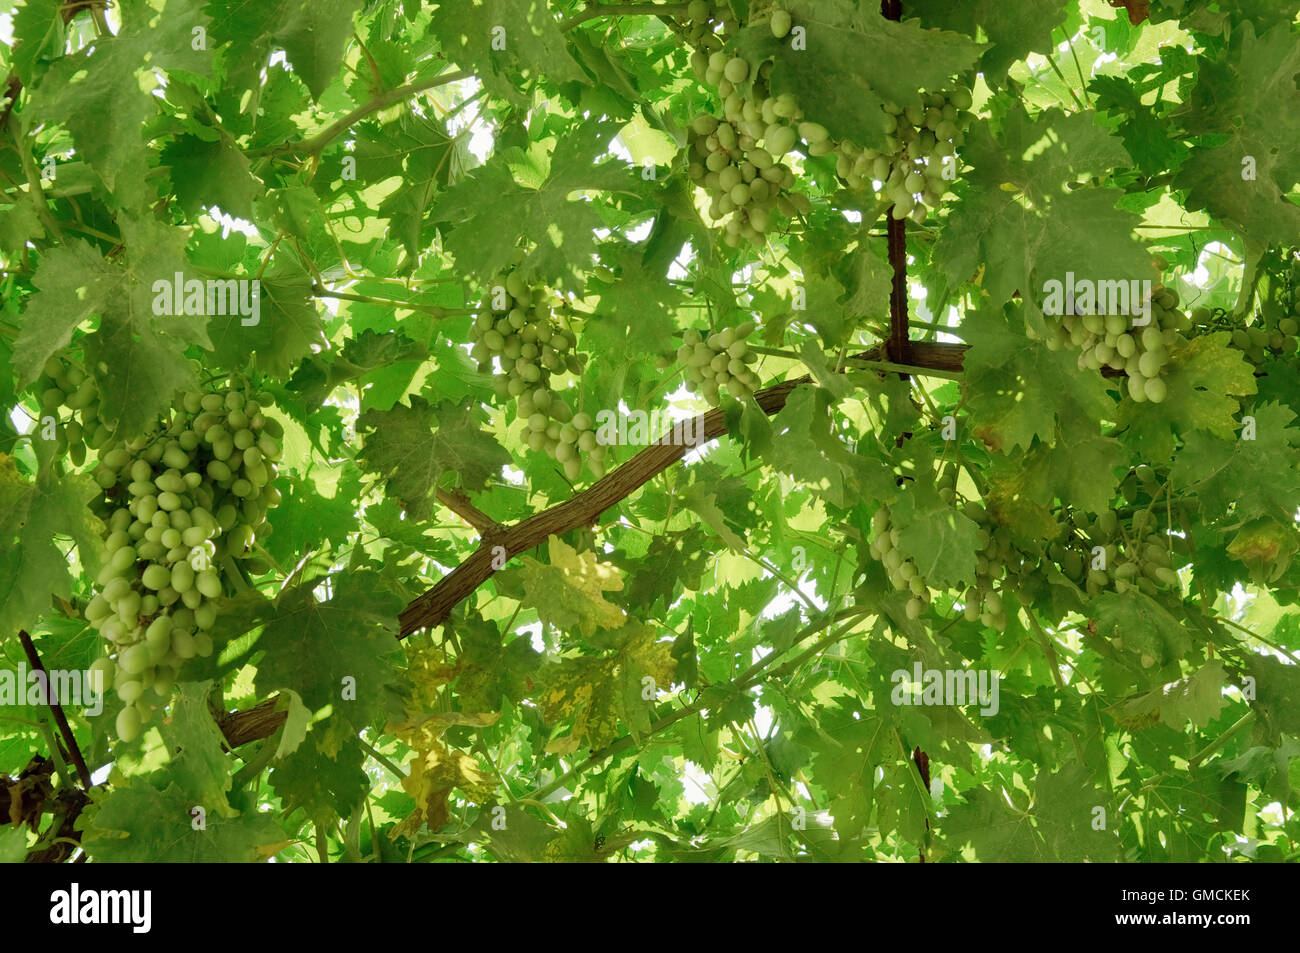 Bunch of grapes on the vine. Stock Photo